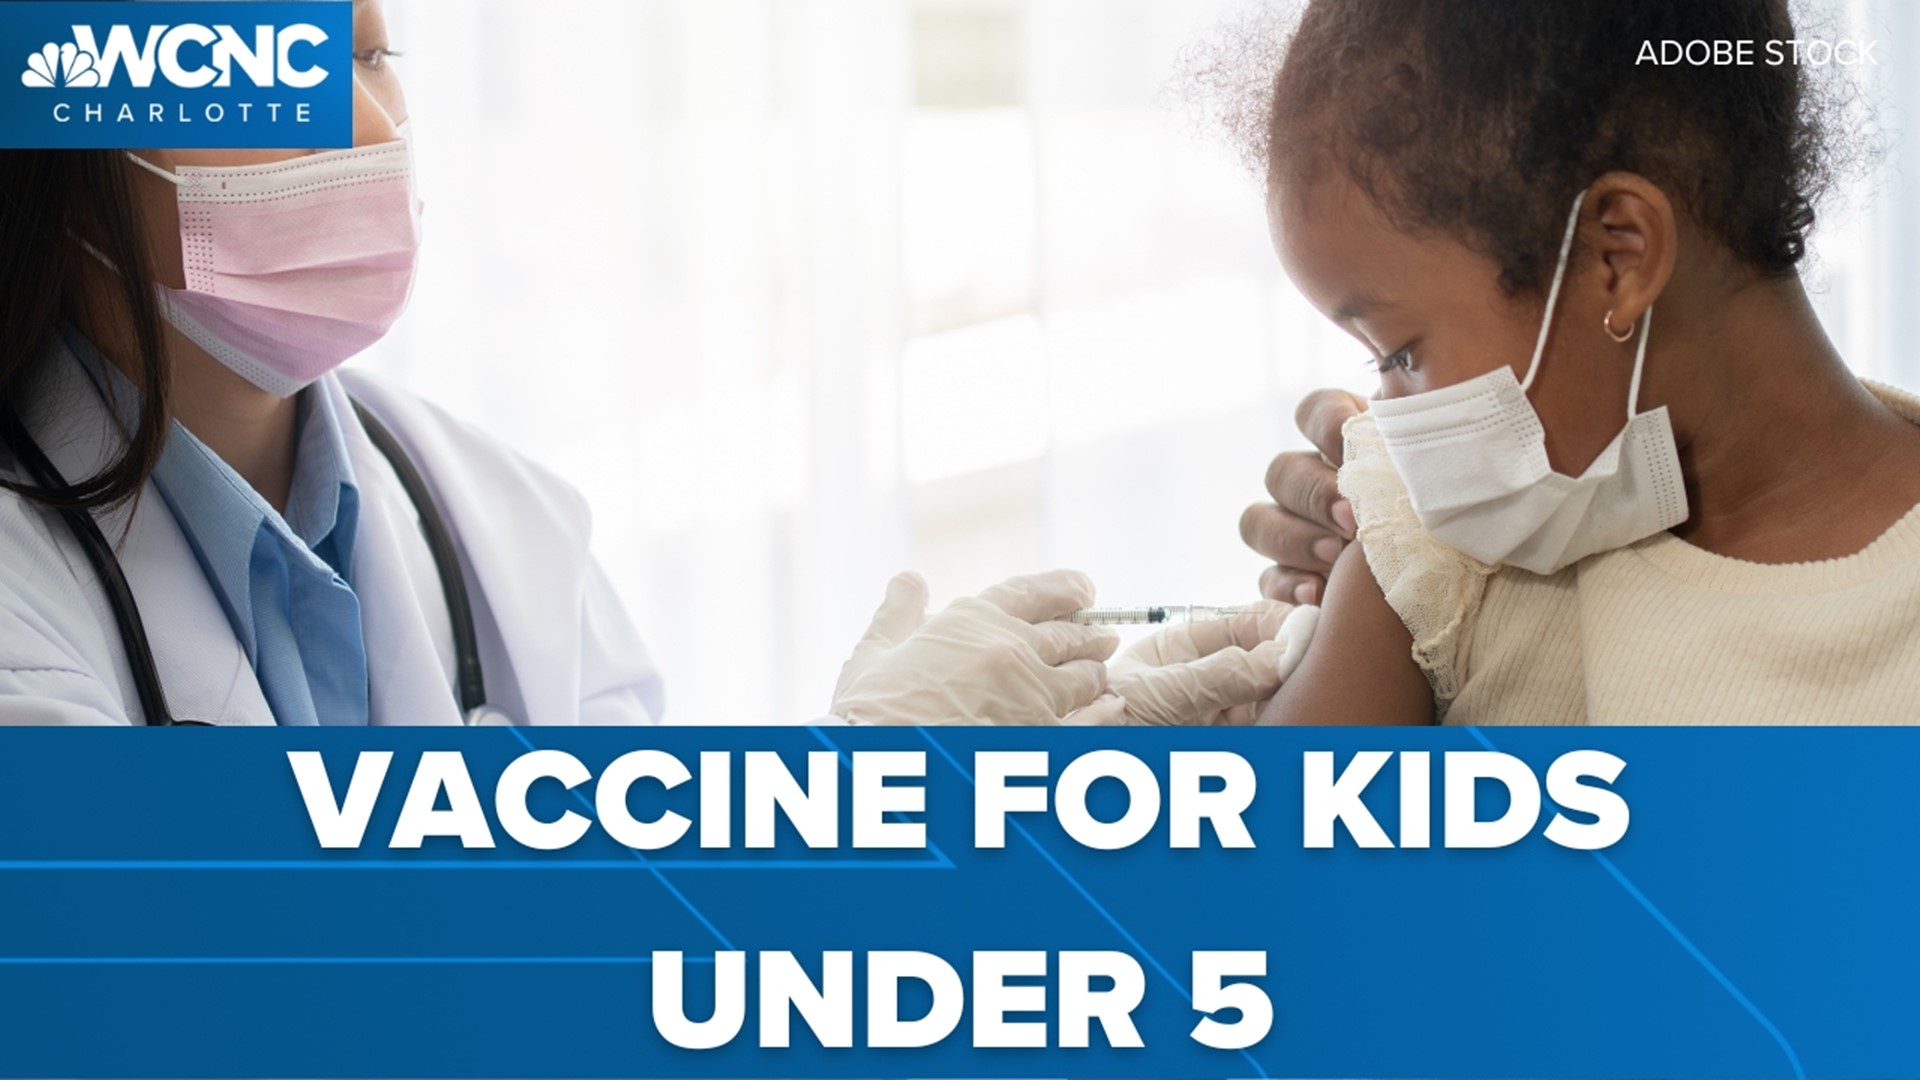 This week the FDA and CDC will consider whether to authorize and recommend the first COVID-19 vaccines for kids under the age of five.